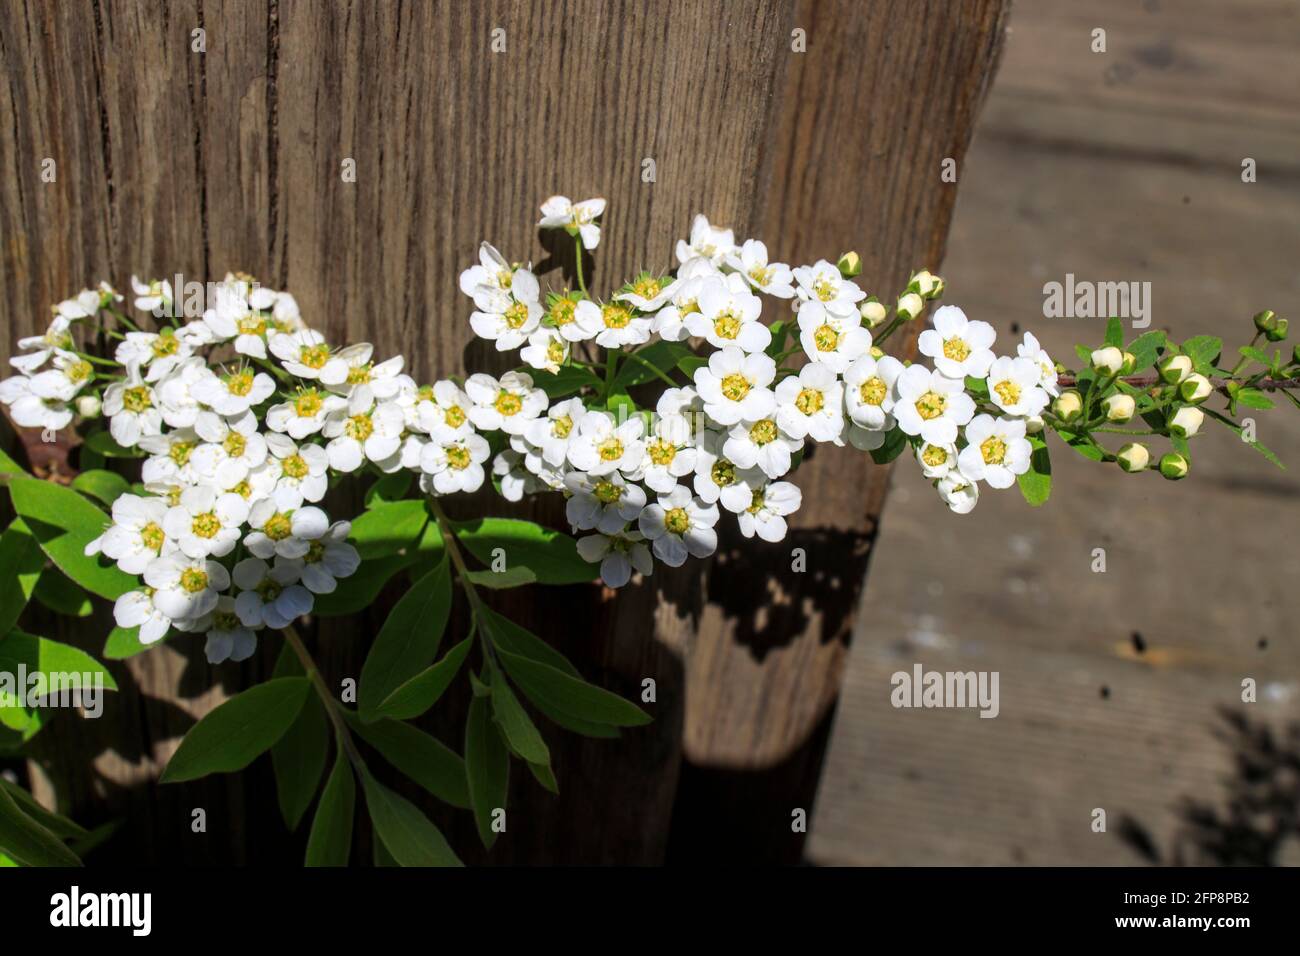 Blooming spirea bushes inside gray wooden benches in a recreation park. Urban design. Stock Photo